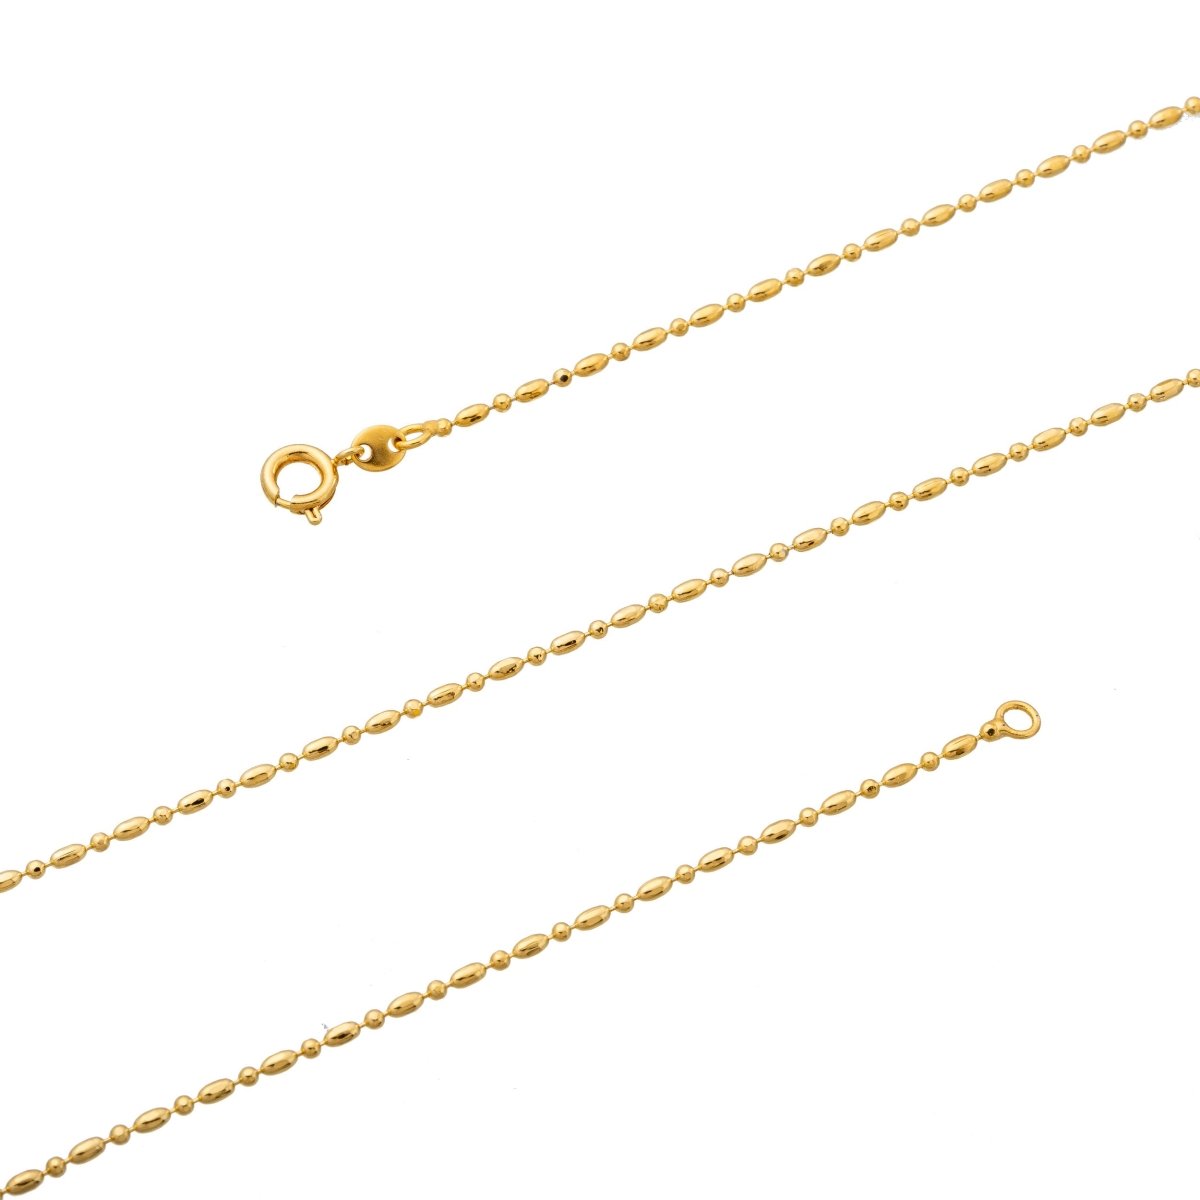 Dainty 24K Gold-Plated 1.5mm Bead Chain Necklace in 17.5 inch Length Finished Ball Chain Ready to Wear with Spring Clasp Chain Replacement | CN-182 Clearance Pricing - DLUXCA